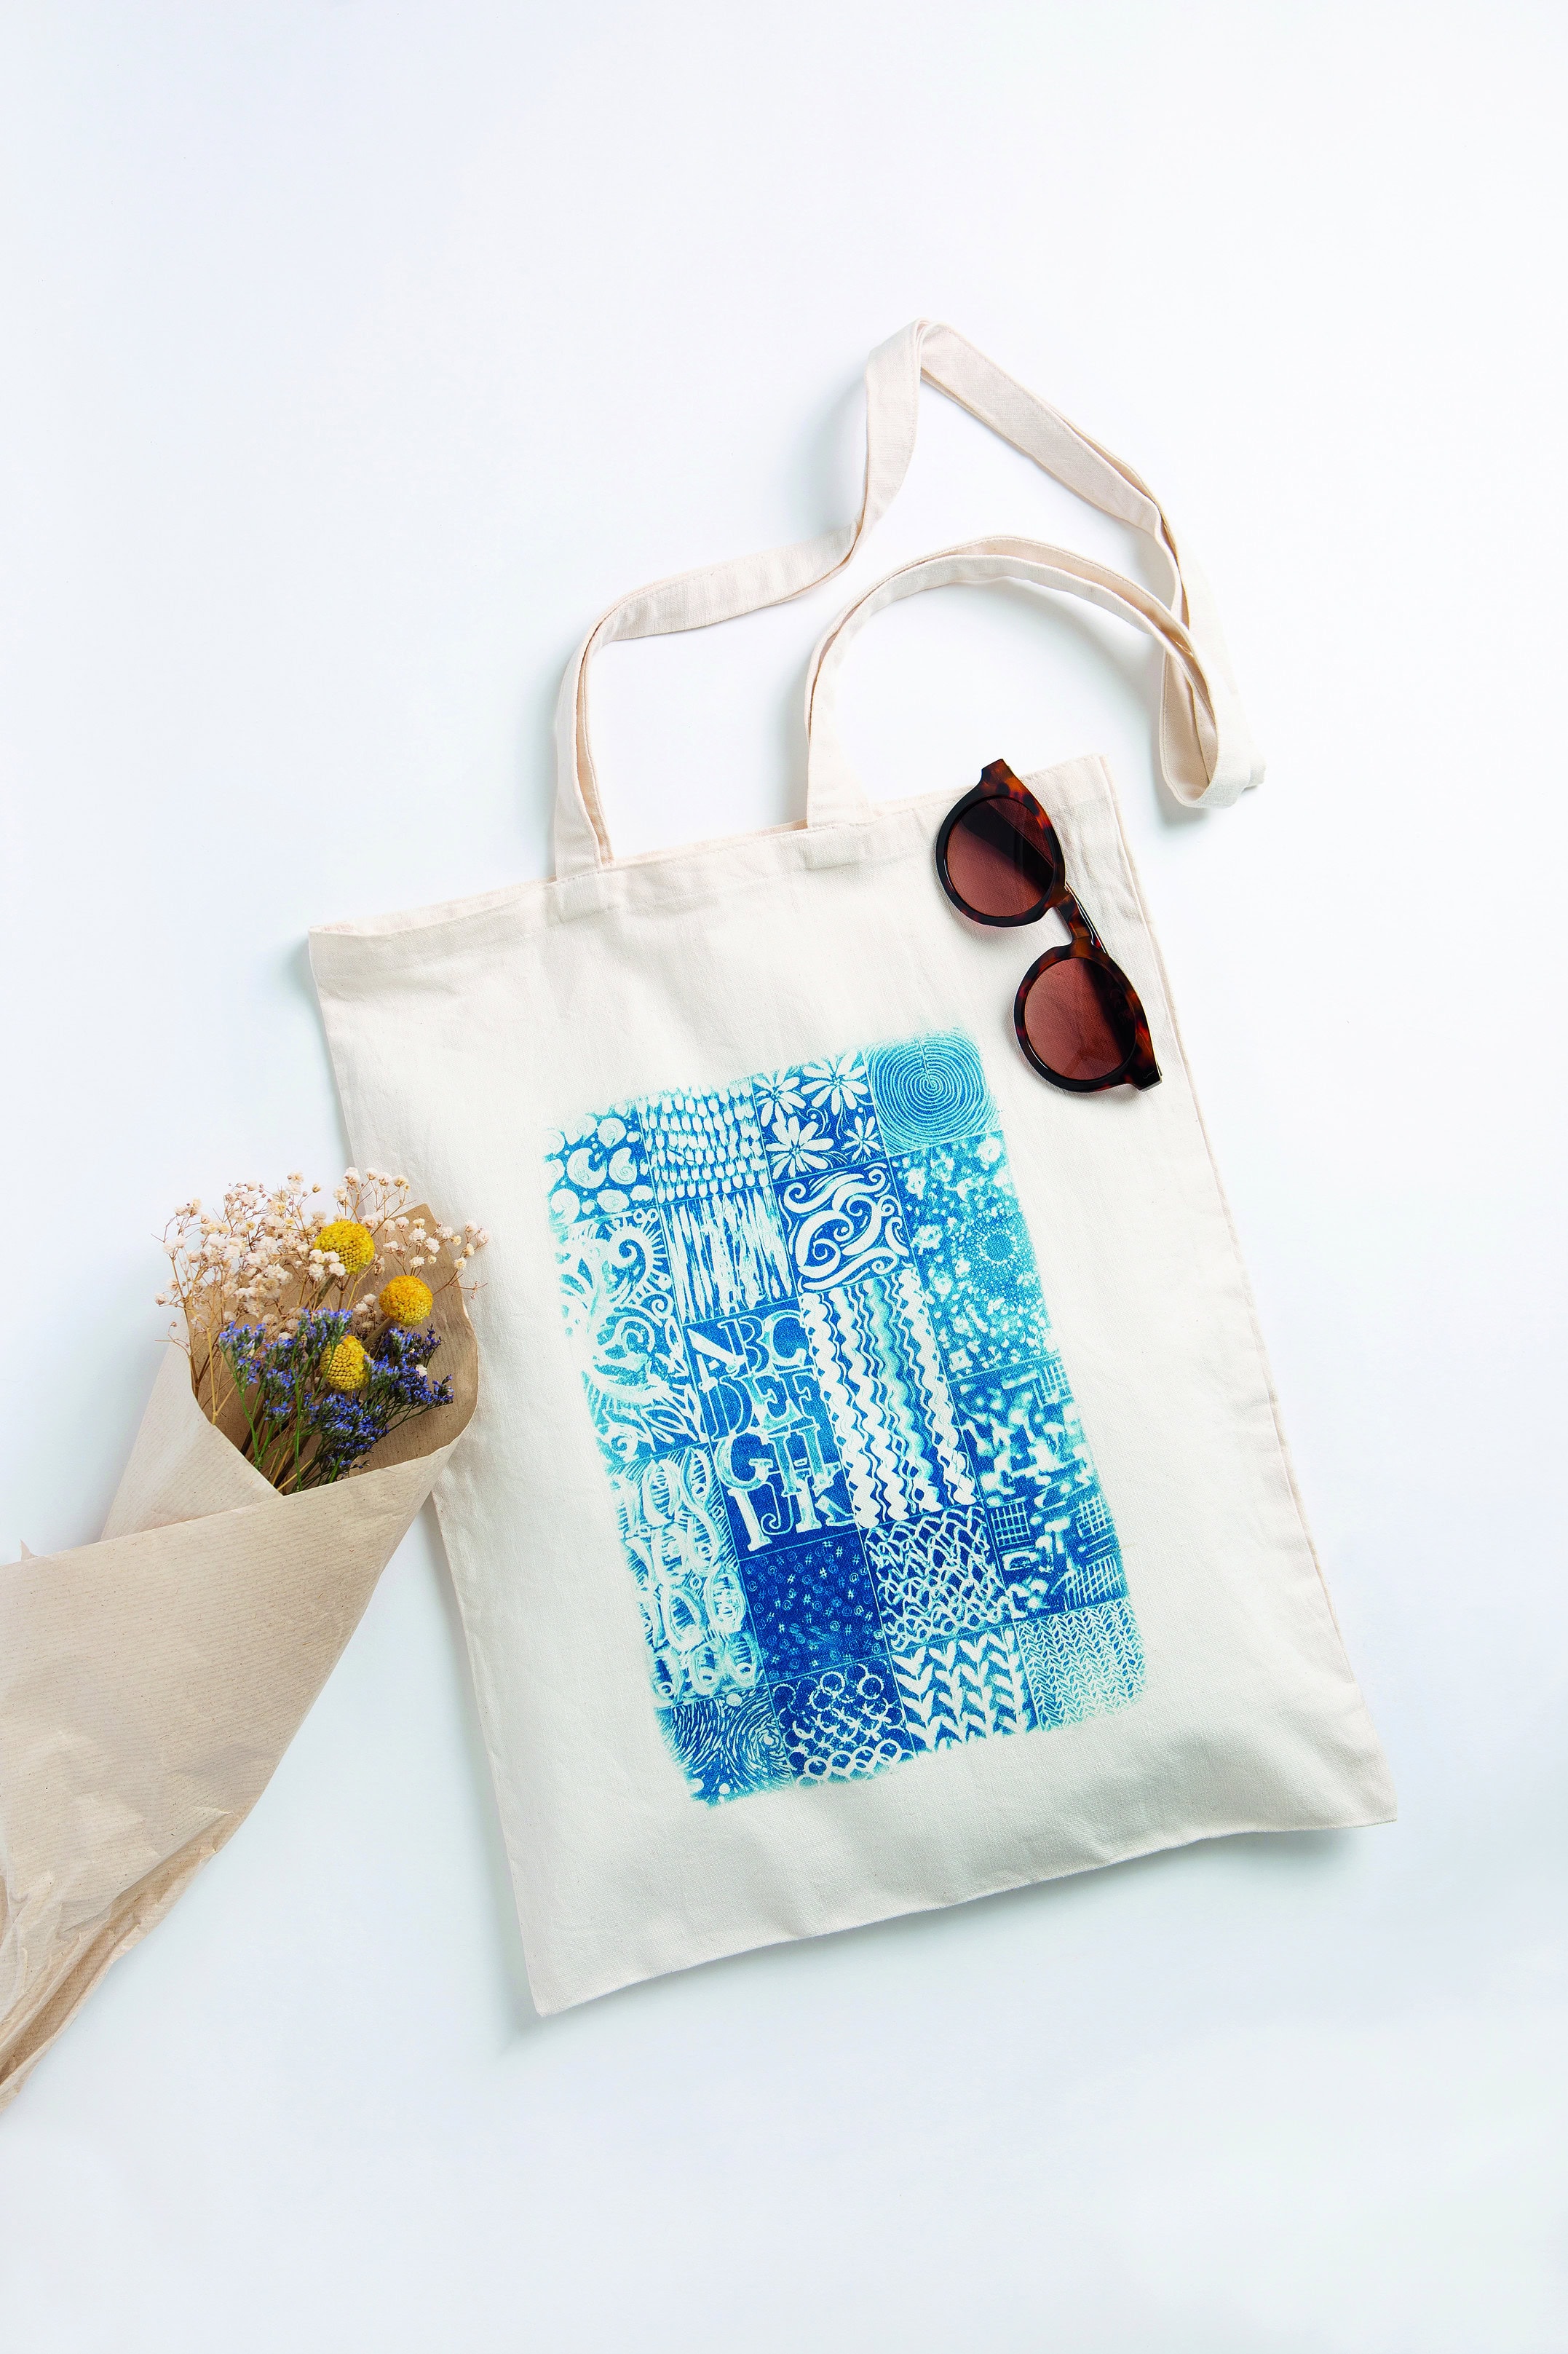 cyanotype tote bag design by kim tillyer from her new book Beginner's Guide to Cyanotype. We have four signed copies to give away as well as a free diy tutorial by kim for you to try your hand at this highly enjoyable and creative craft